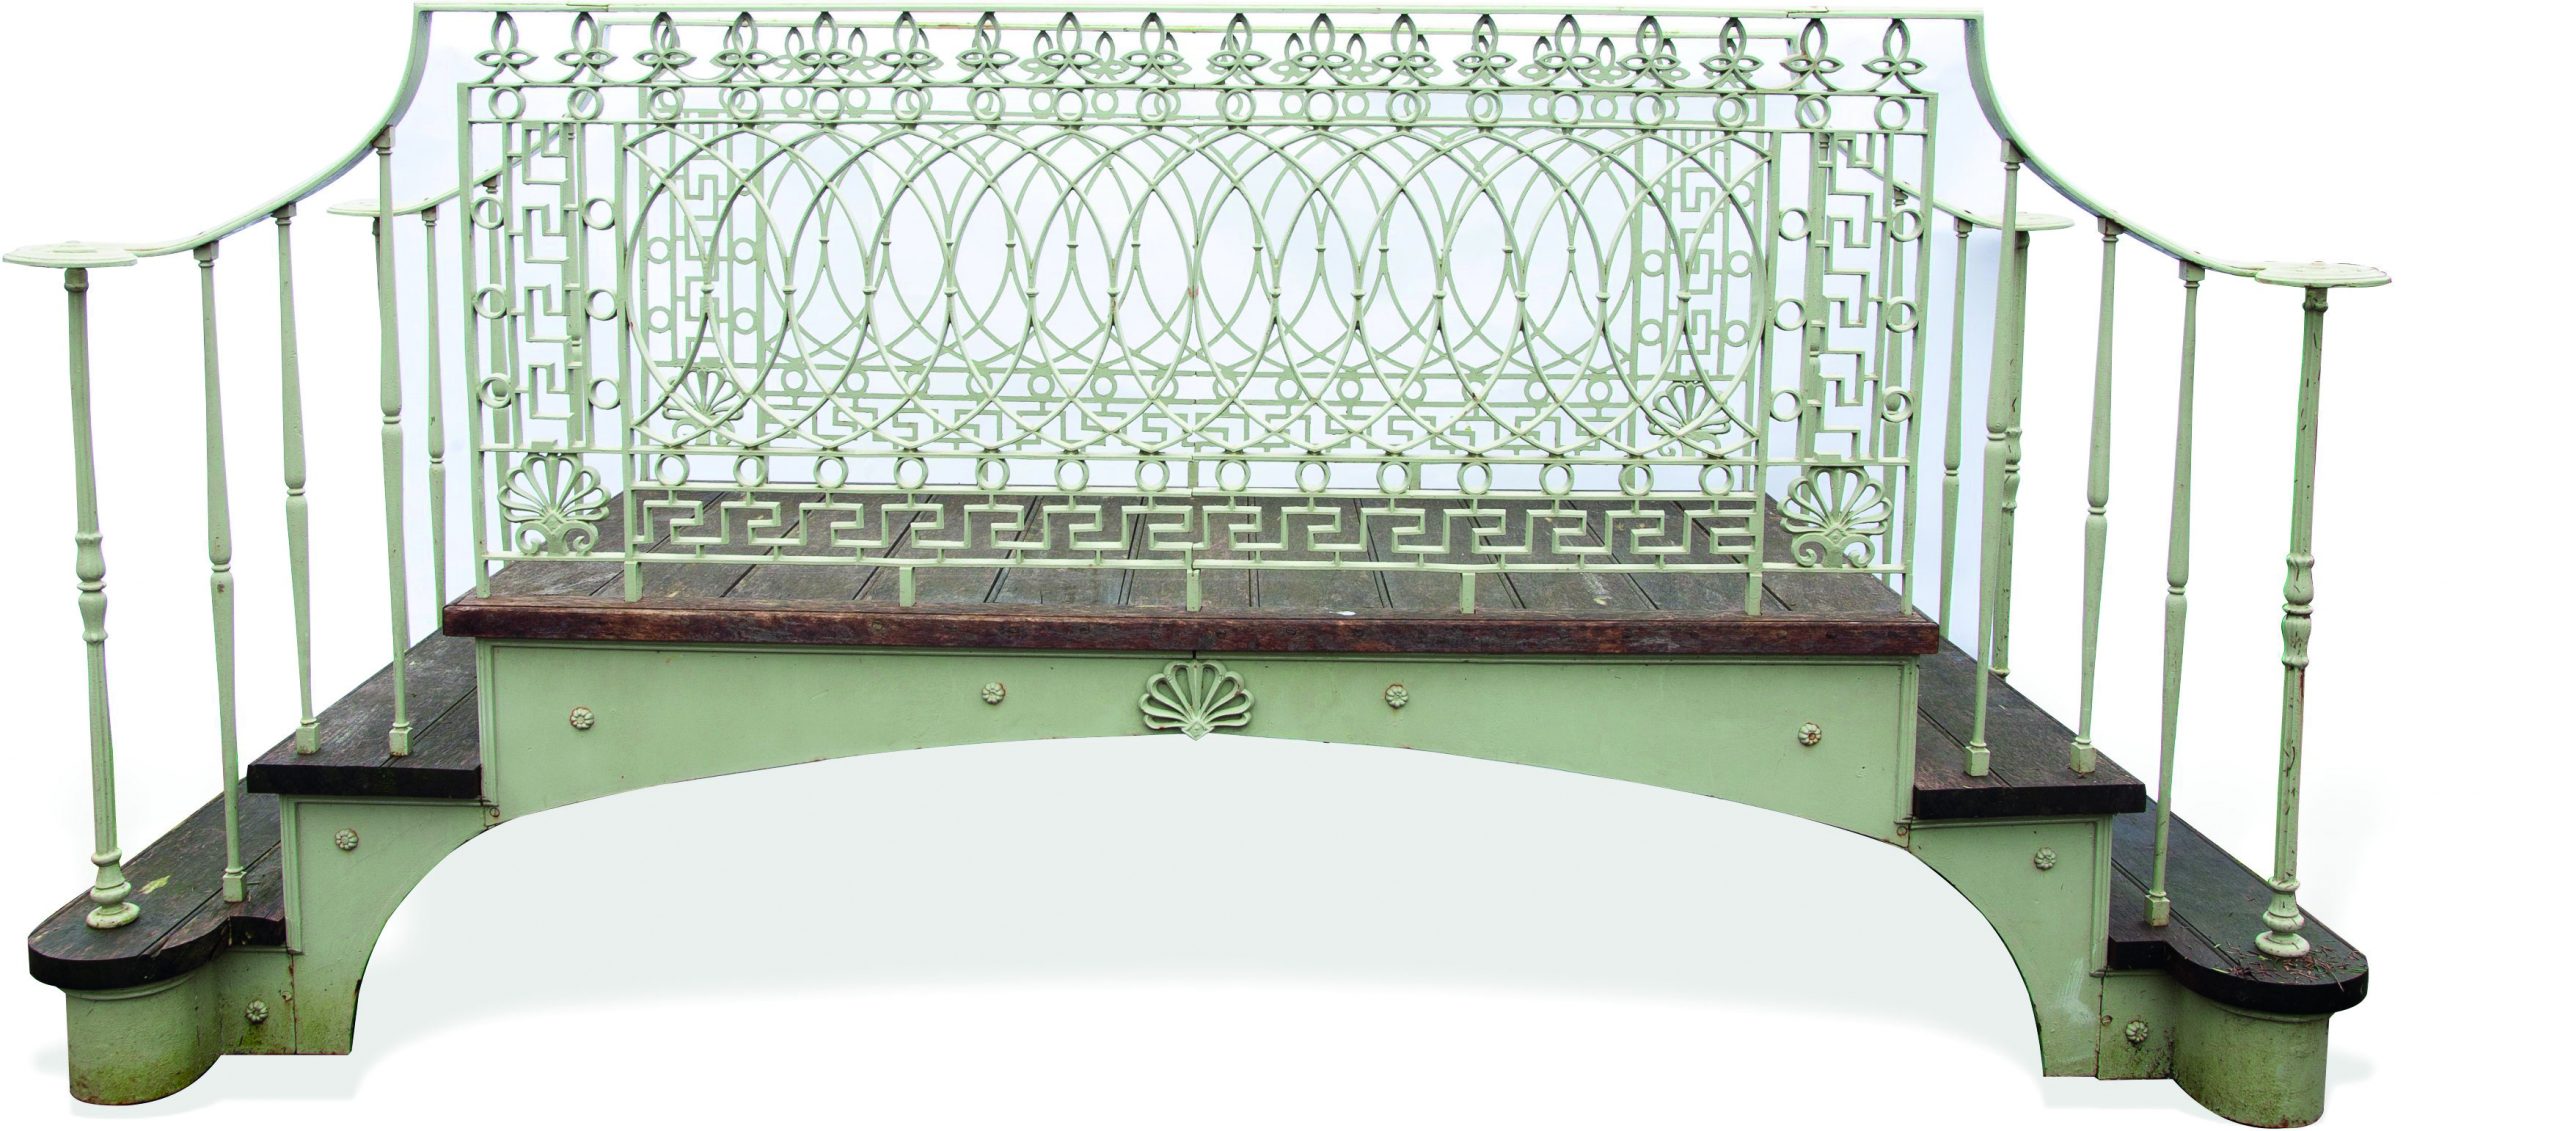 A wrought and cast iron bridge